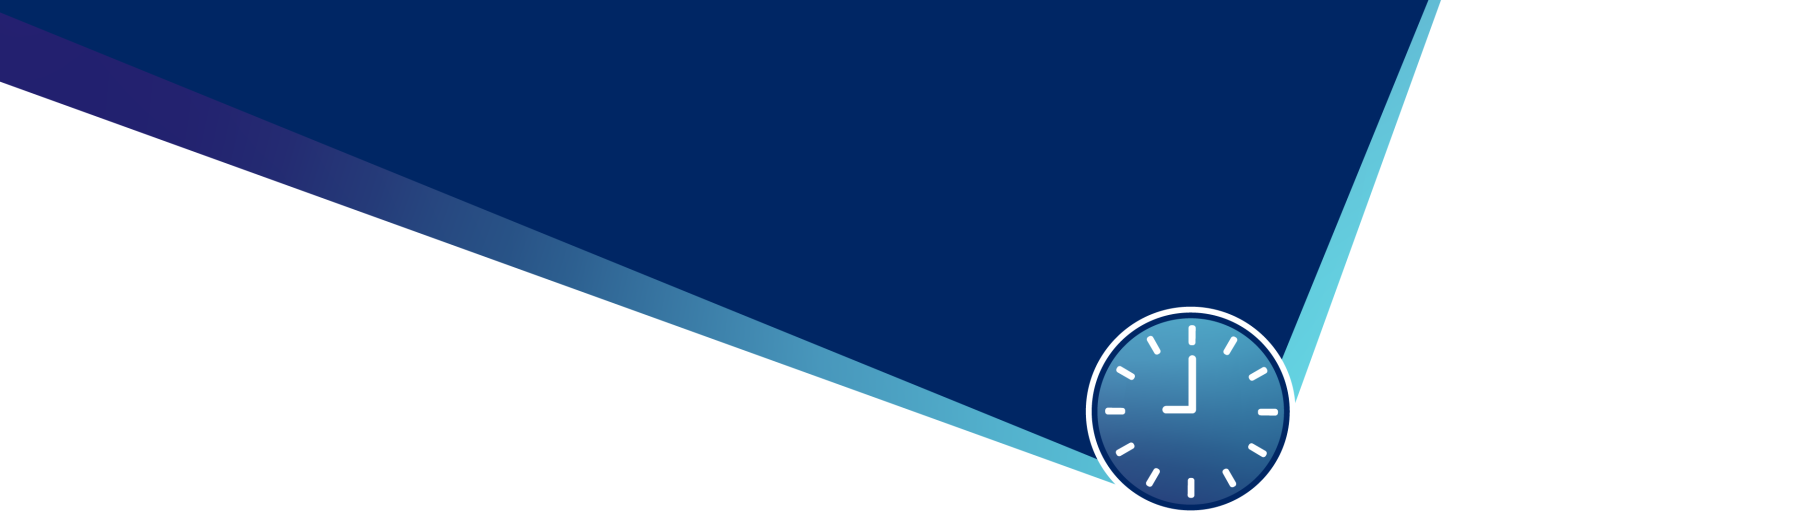 Blue and white ScotRail branded illustration of a clock